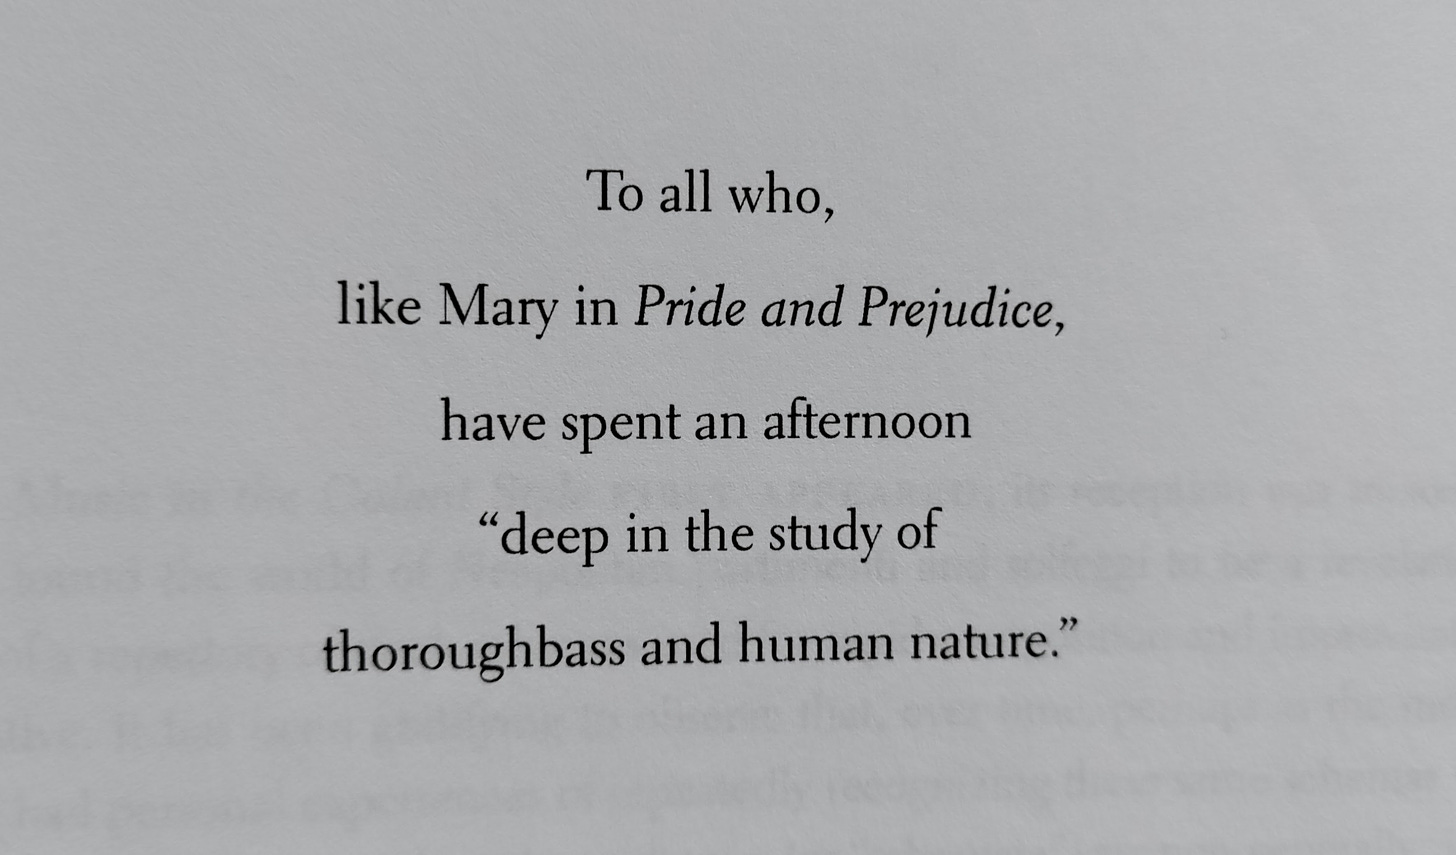 Text says: To all who,  like Mary in Pride and Prejudice,  have spent an afternoon  "deep in the study of  thoroughbass and human nature."